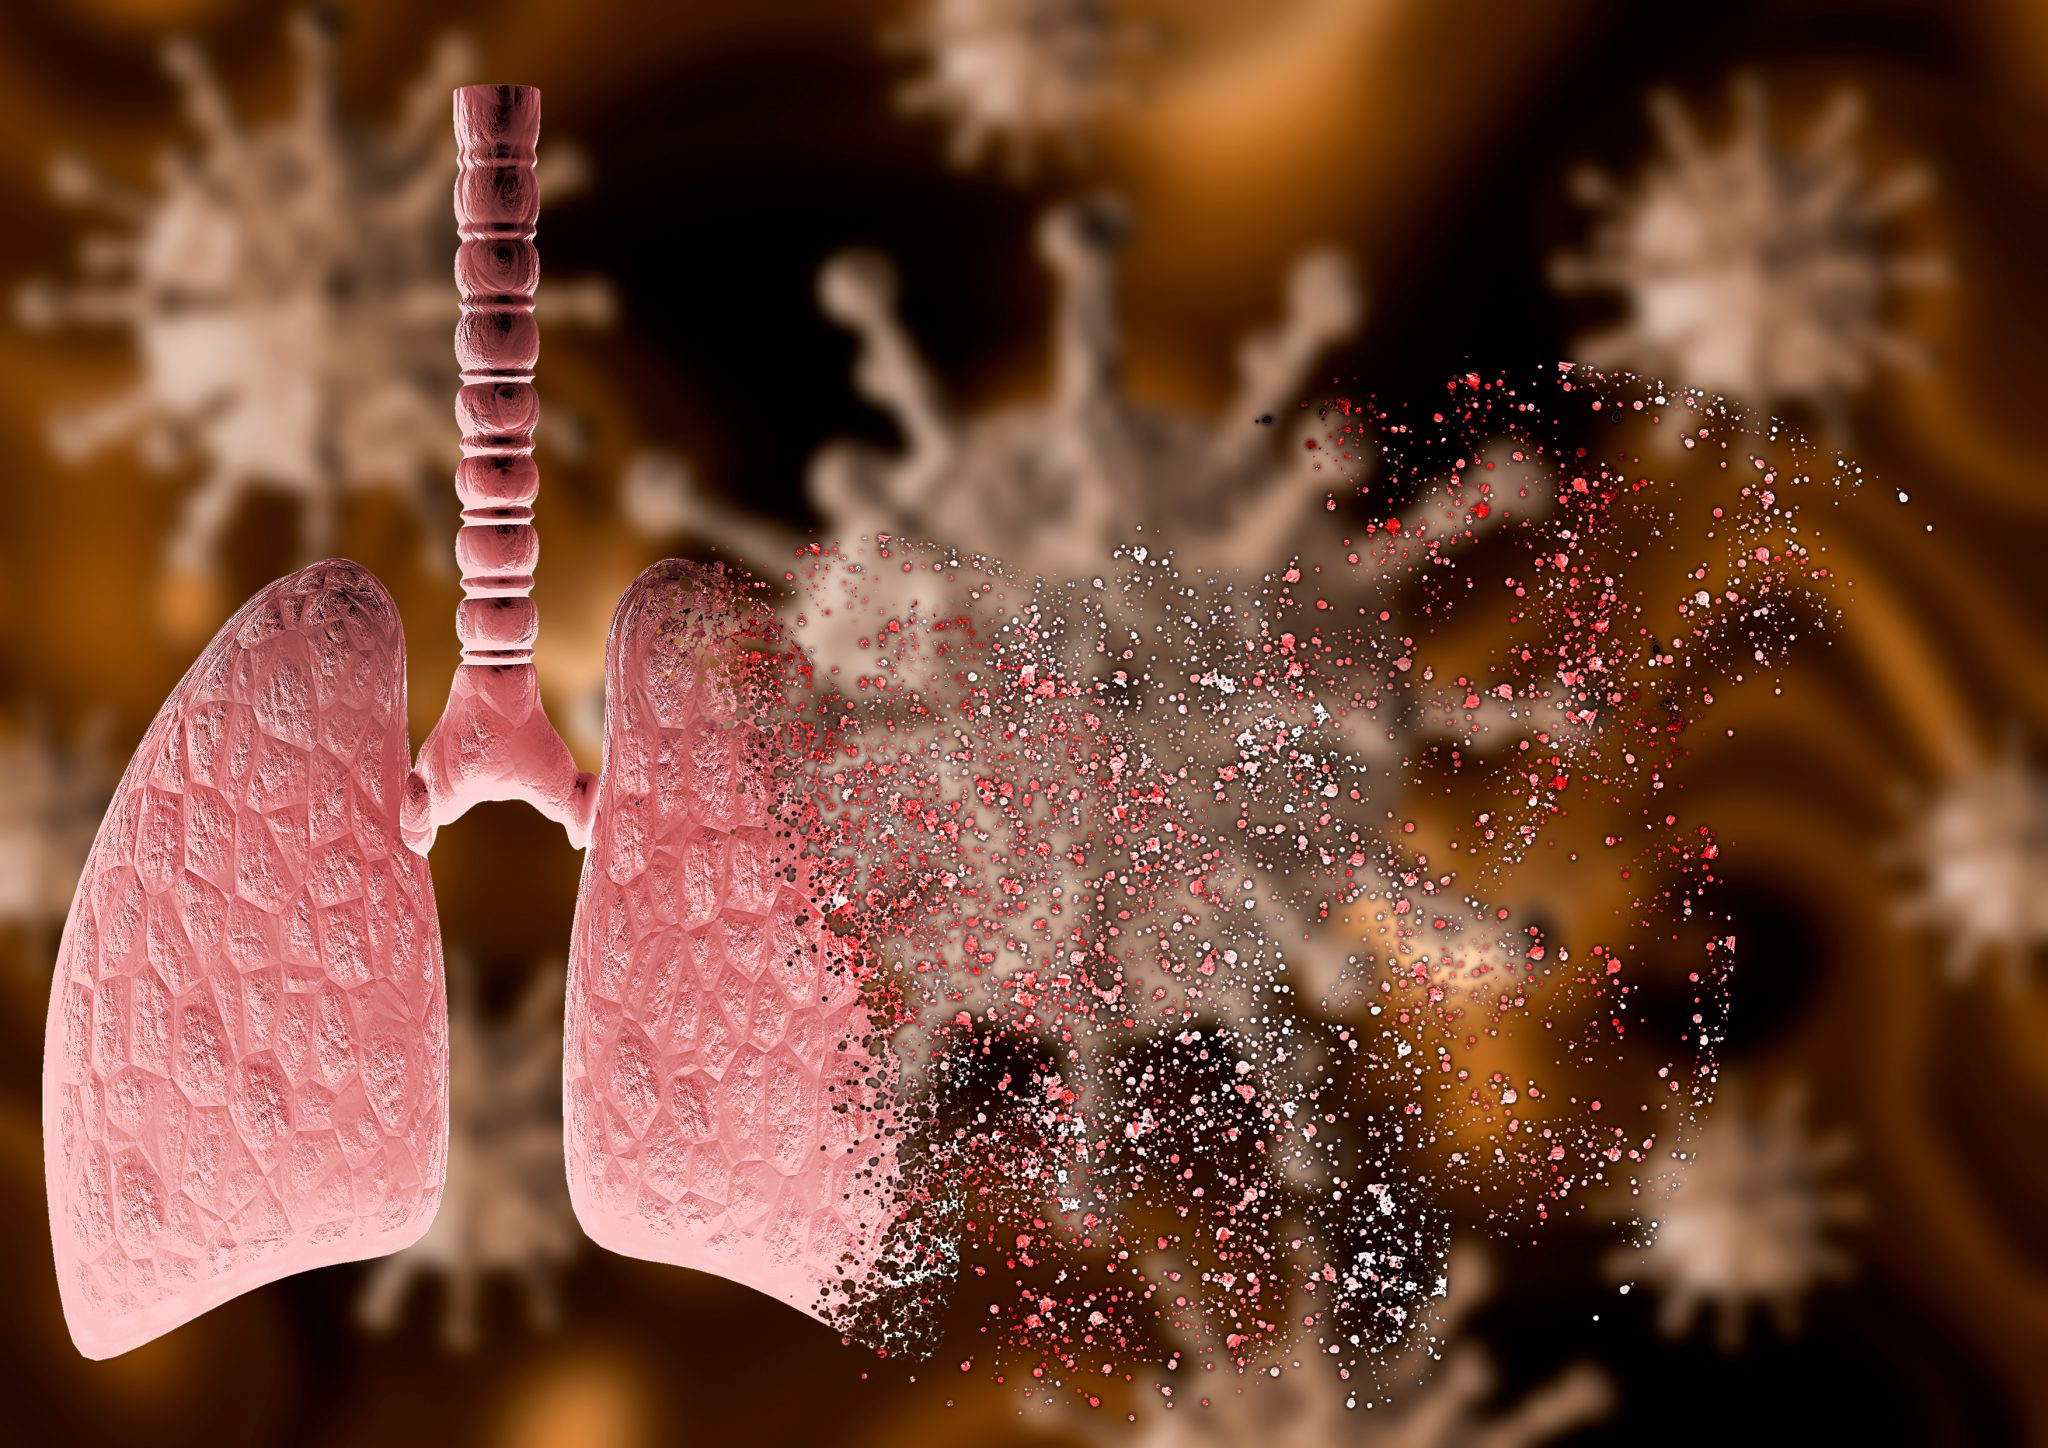 coronavirus attacking lung with severe pneumonia disintegrating it, leading to death